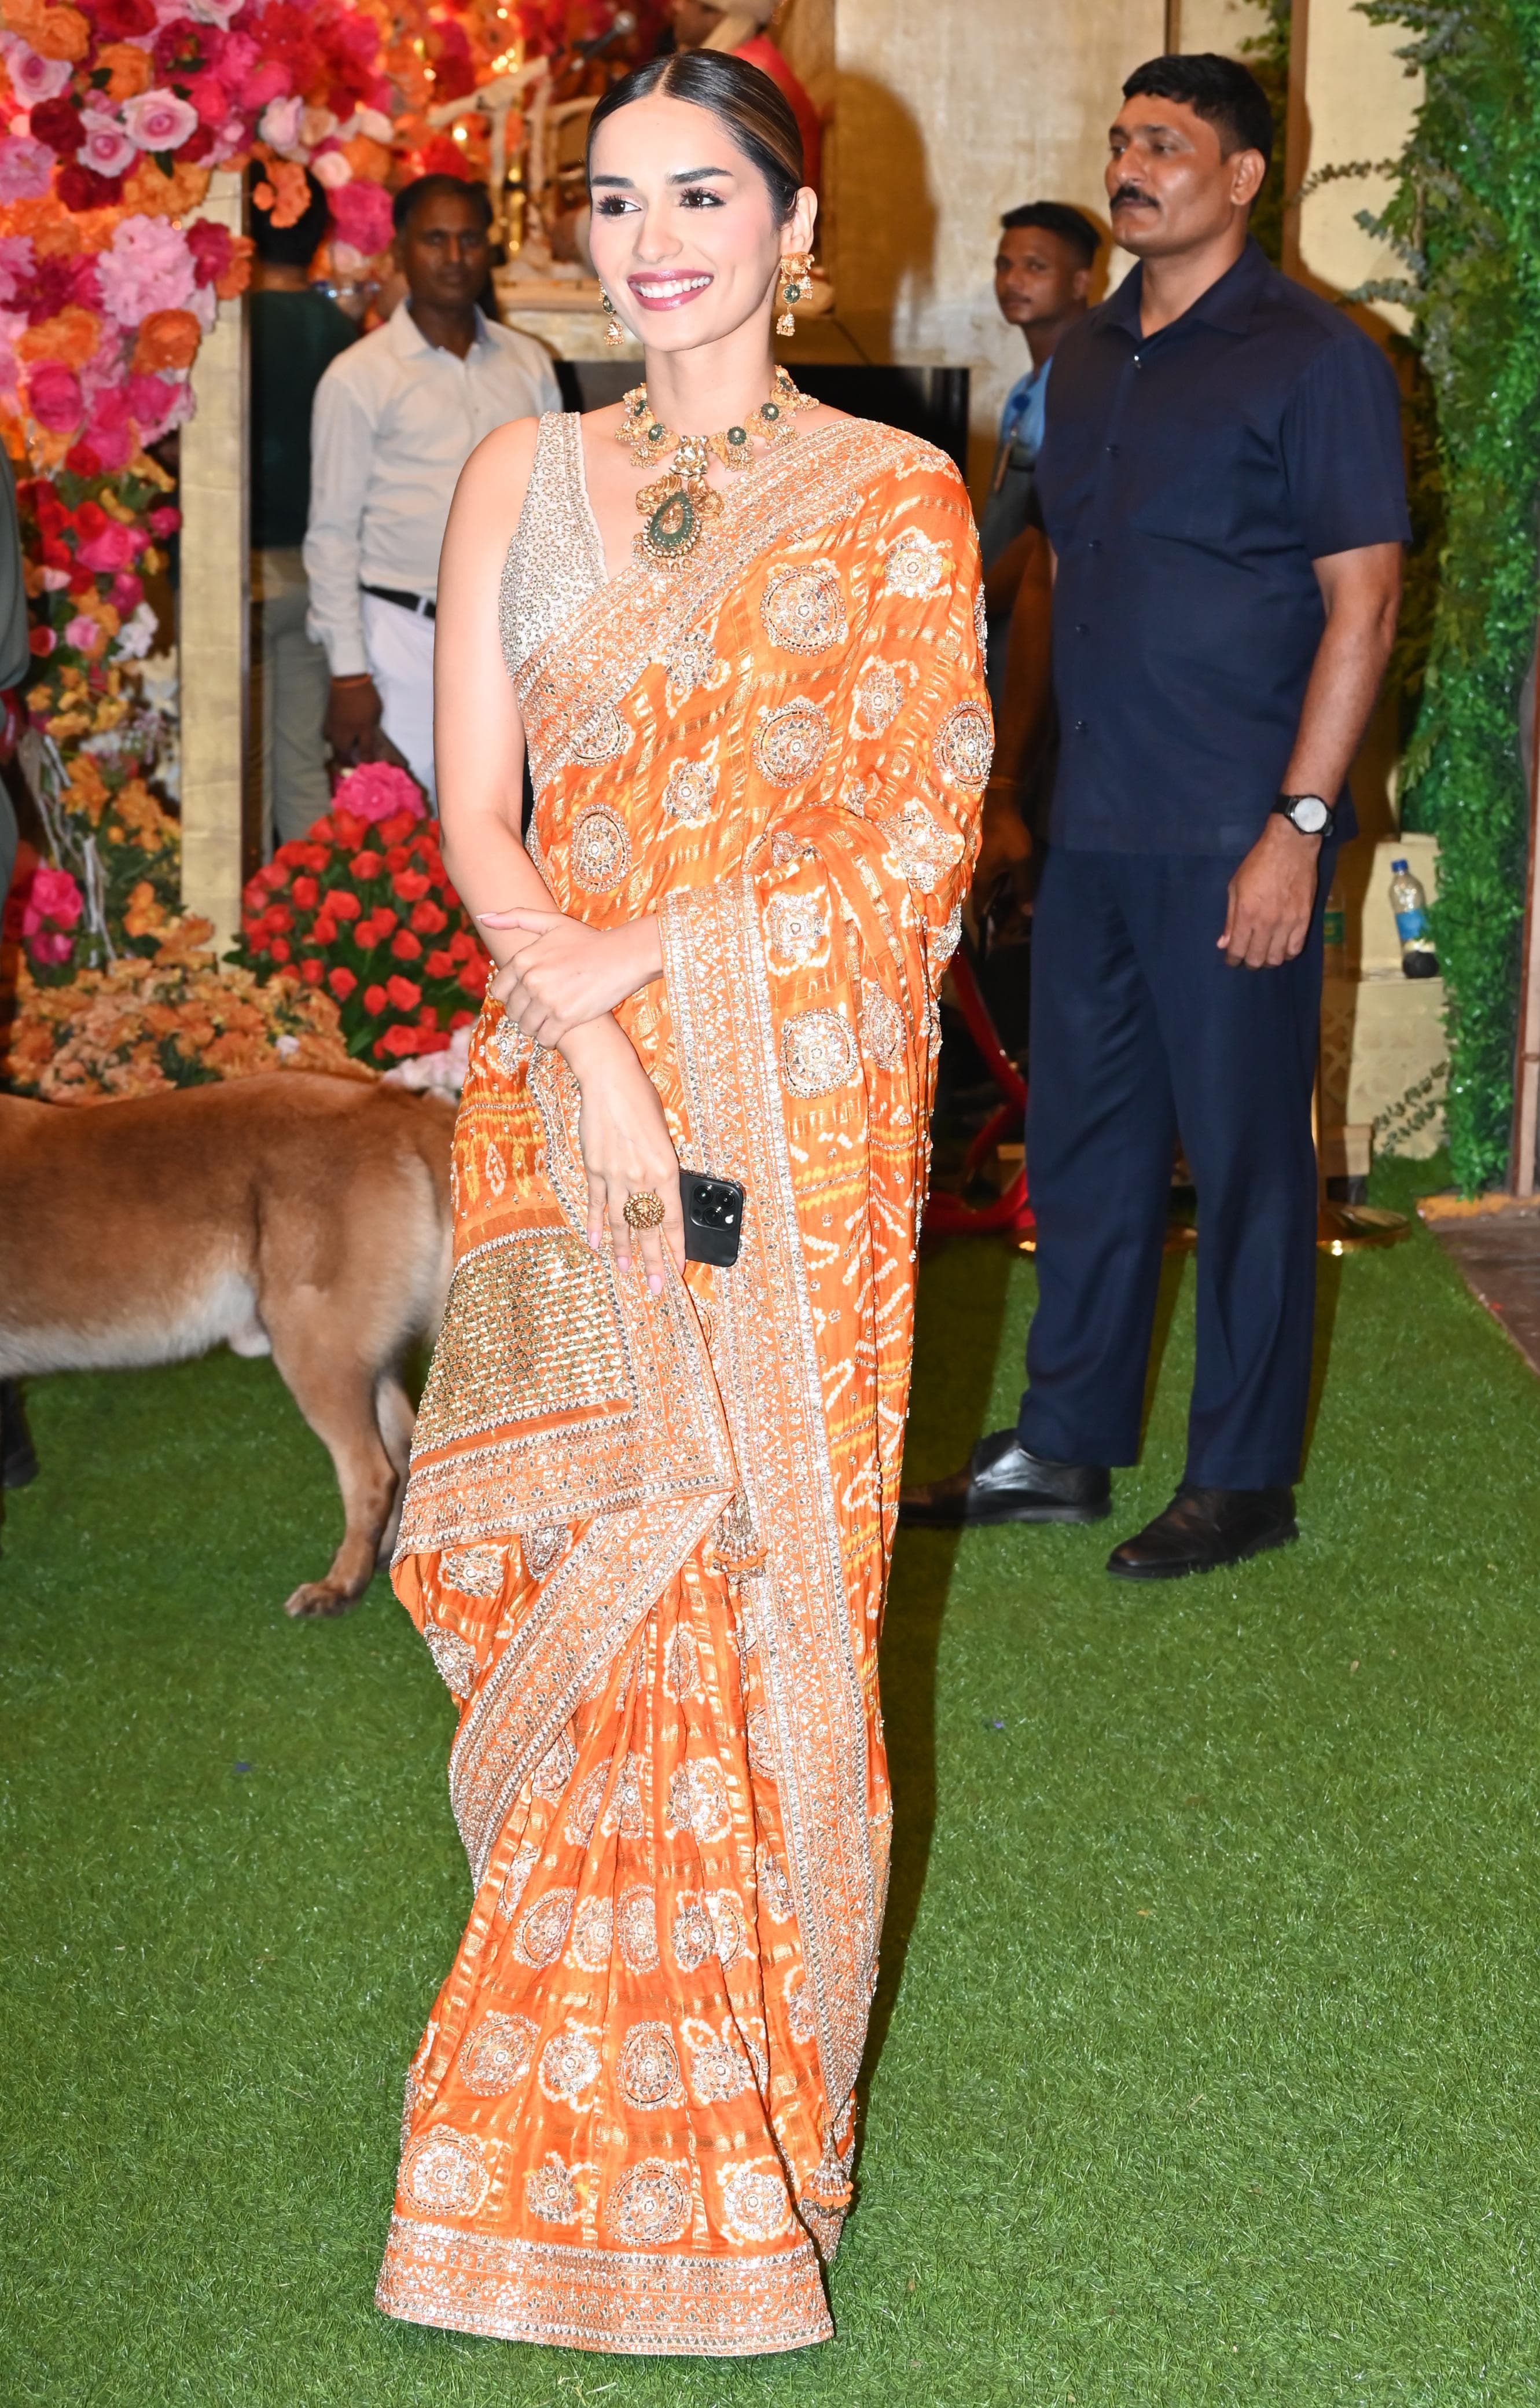 Manushi Chhillar was also present at the ceremony, wearing a stunning, heavily decorated orange saree